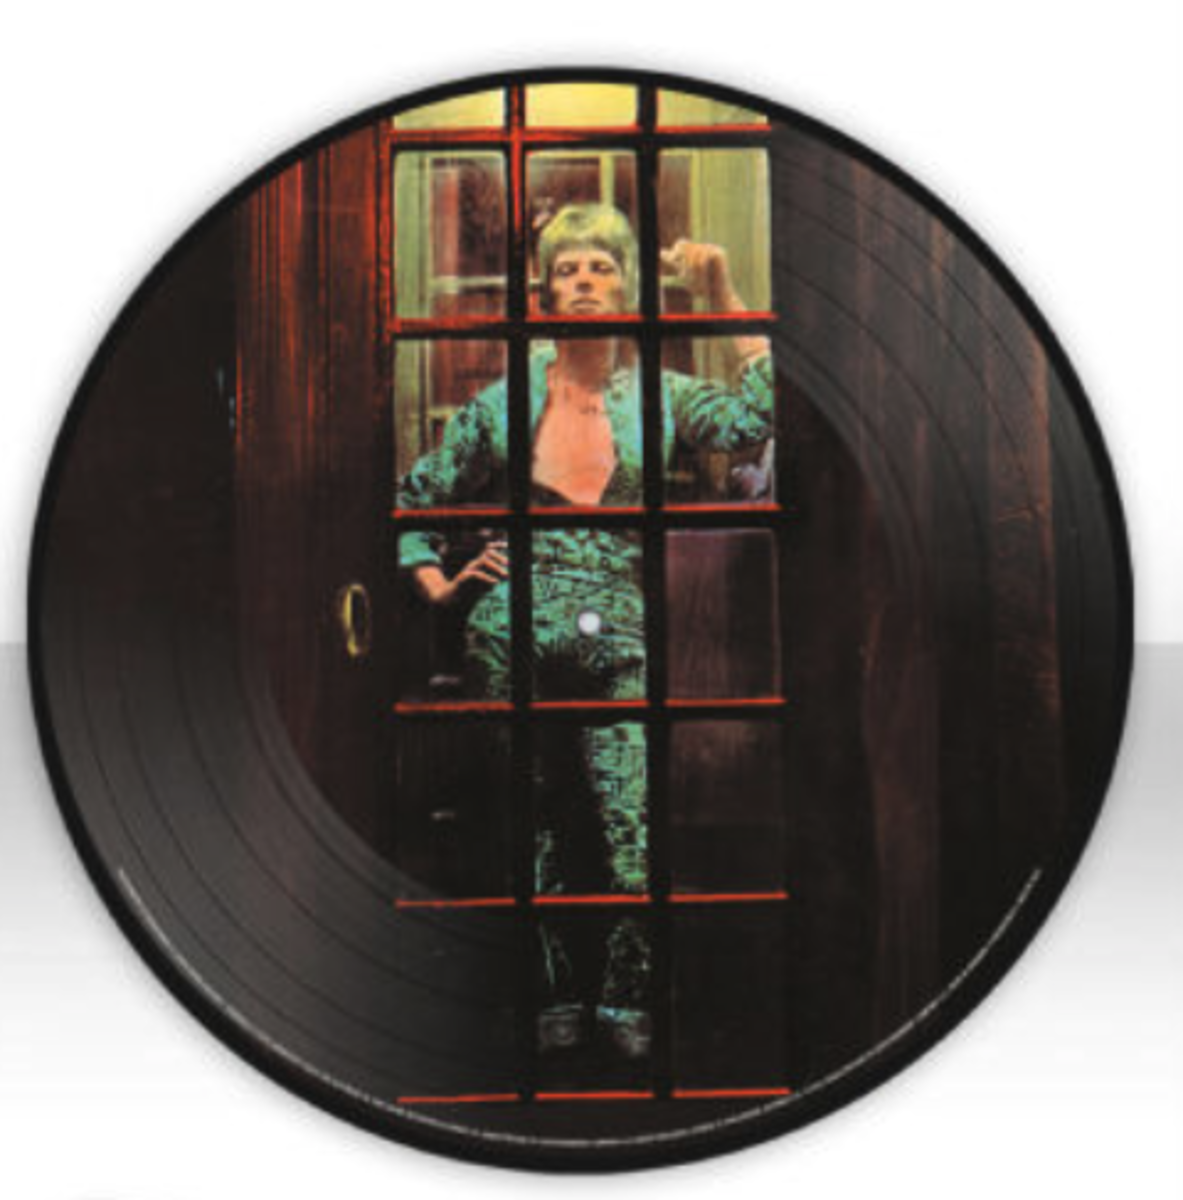 50th anniversary Picture Disc of The Rise and Fall of Ziggy Stardust and The Spiders From Mars